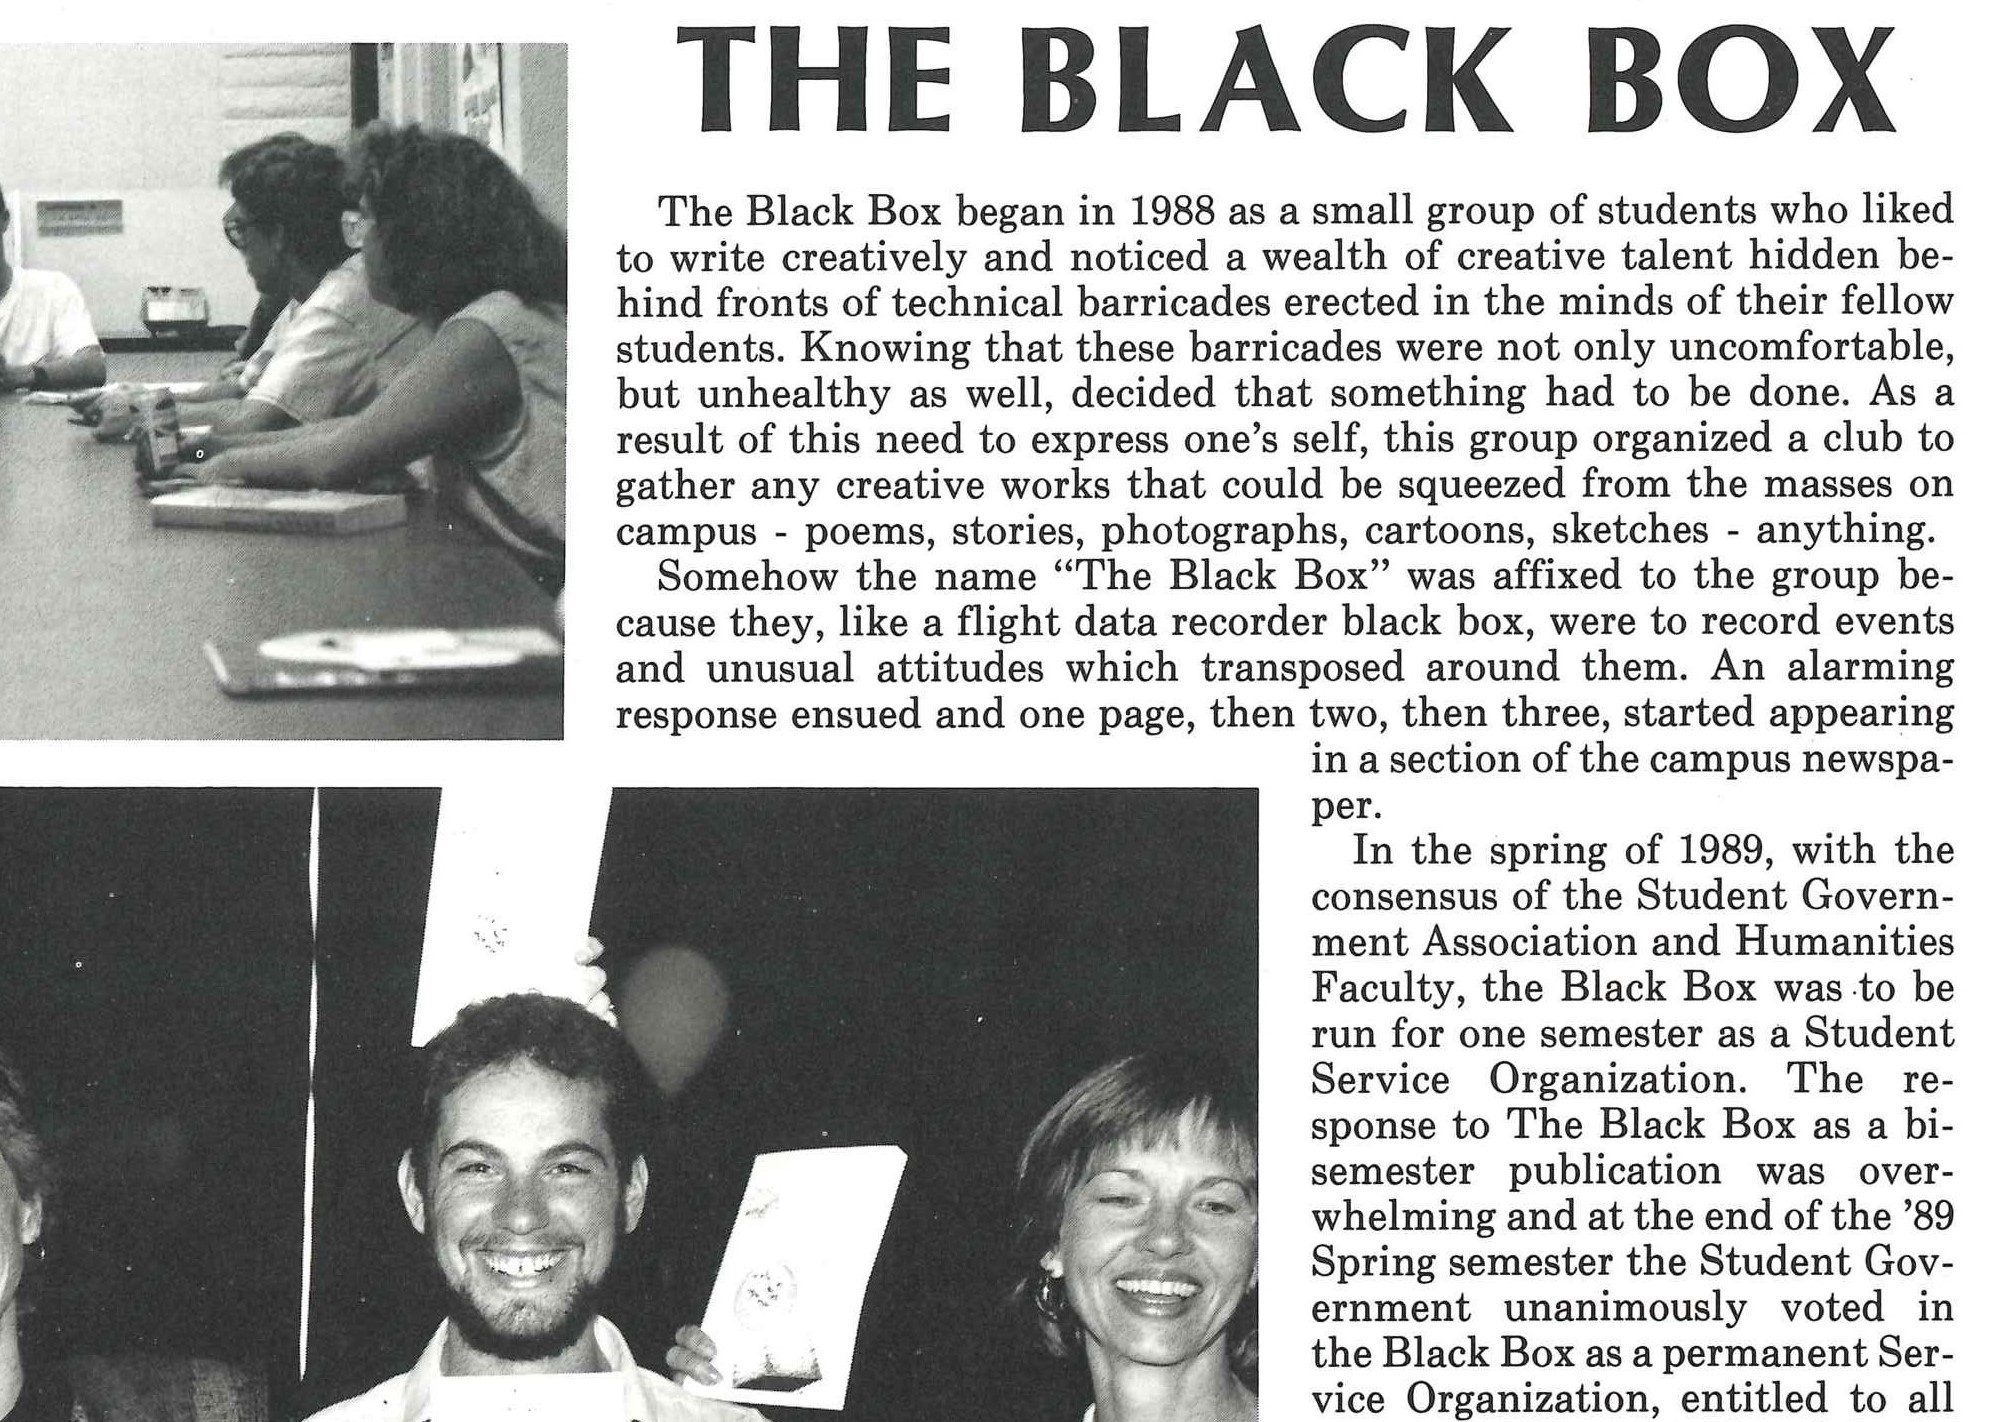 A scanned black-and-white page from ERAU-Prescott's 1990 yearbook, featuring The Black Box magazine and student organization. Eileen smiles alongside her students in the photos on this page.